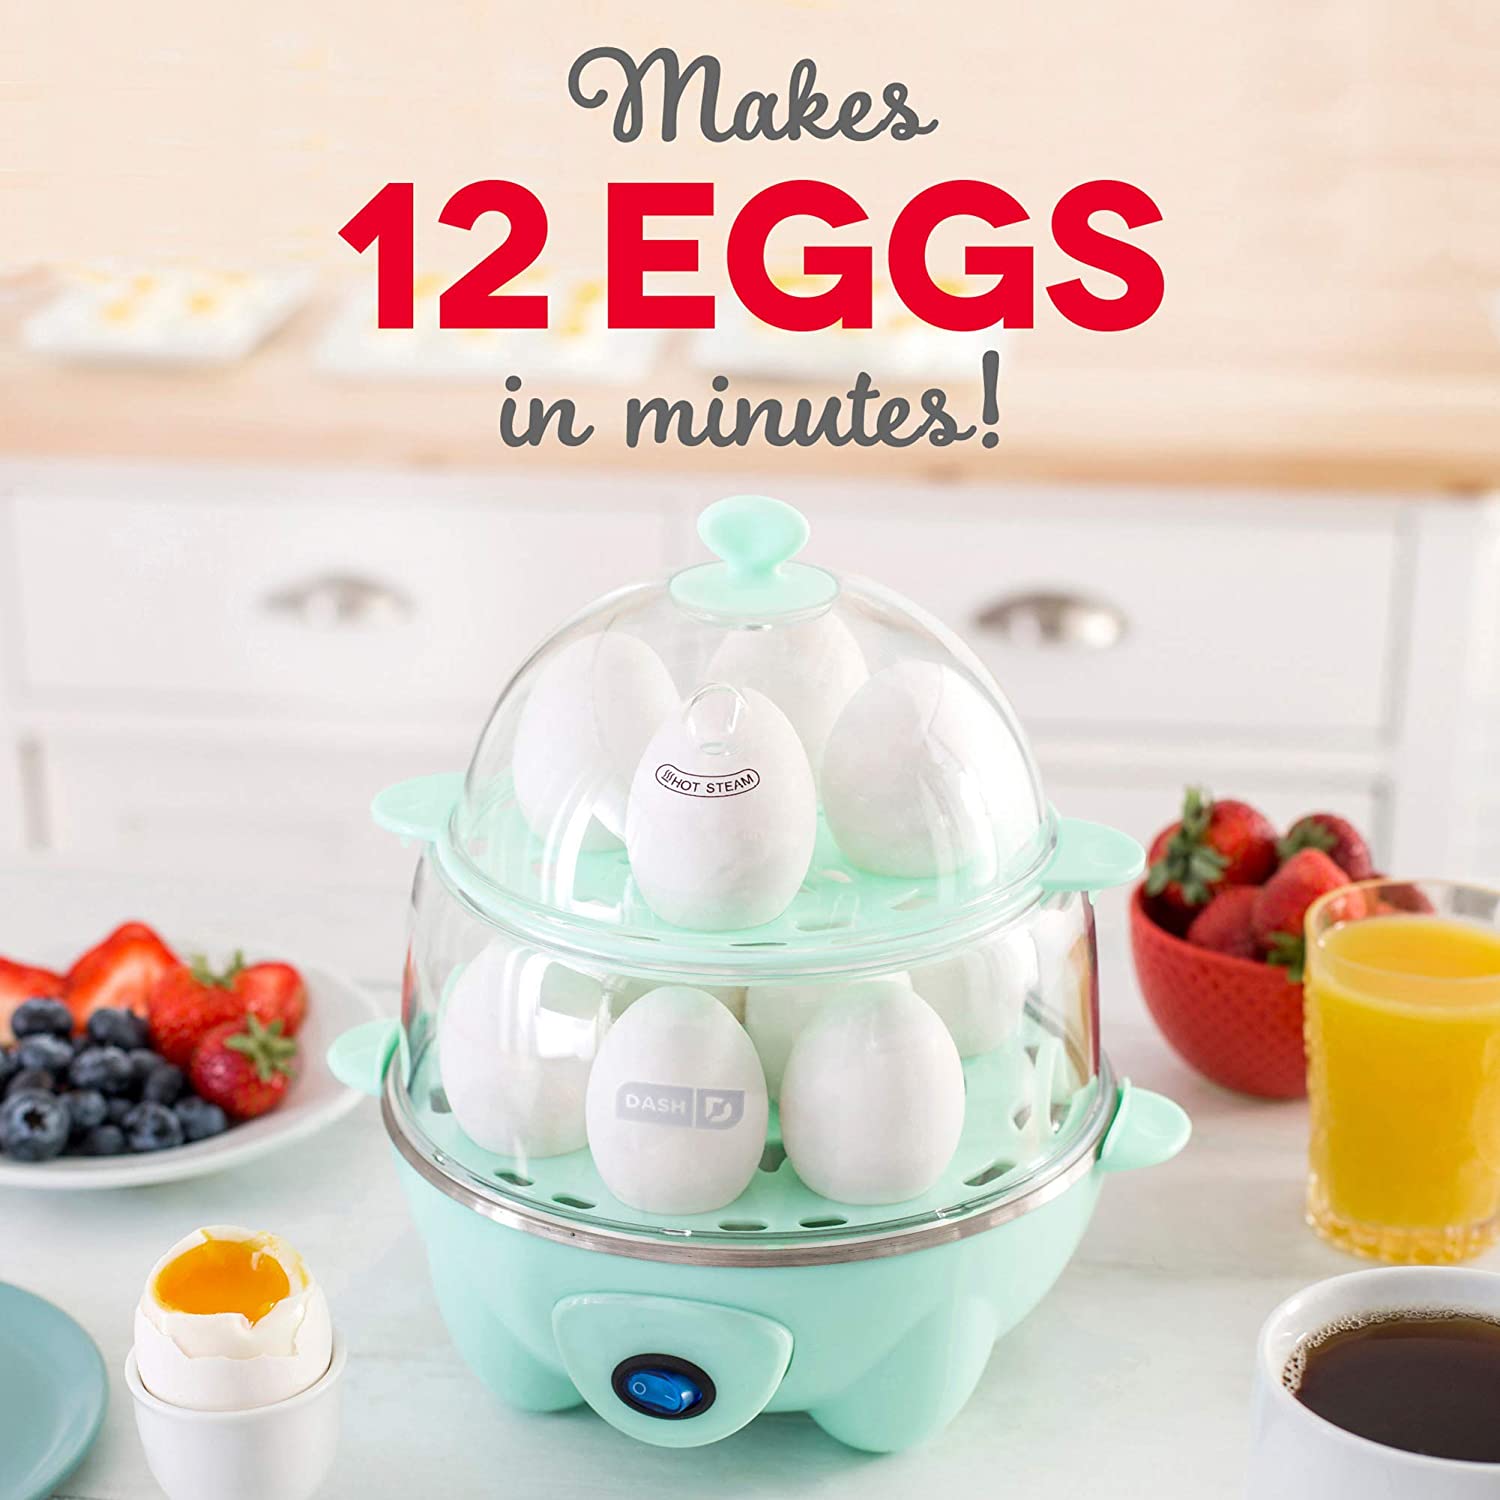 This Dash Deluxe Rapid 12-Count Egg Cooker is Highly Rated